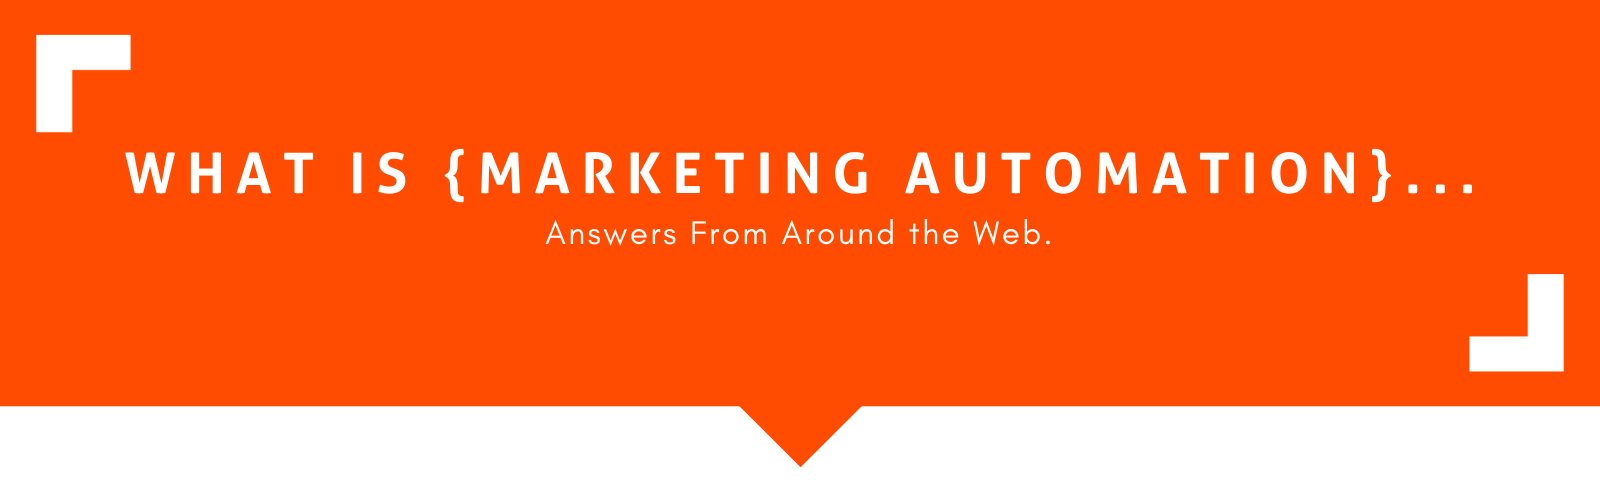 What_Is_Marketing_Automation